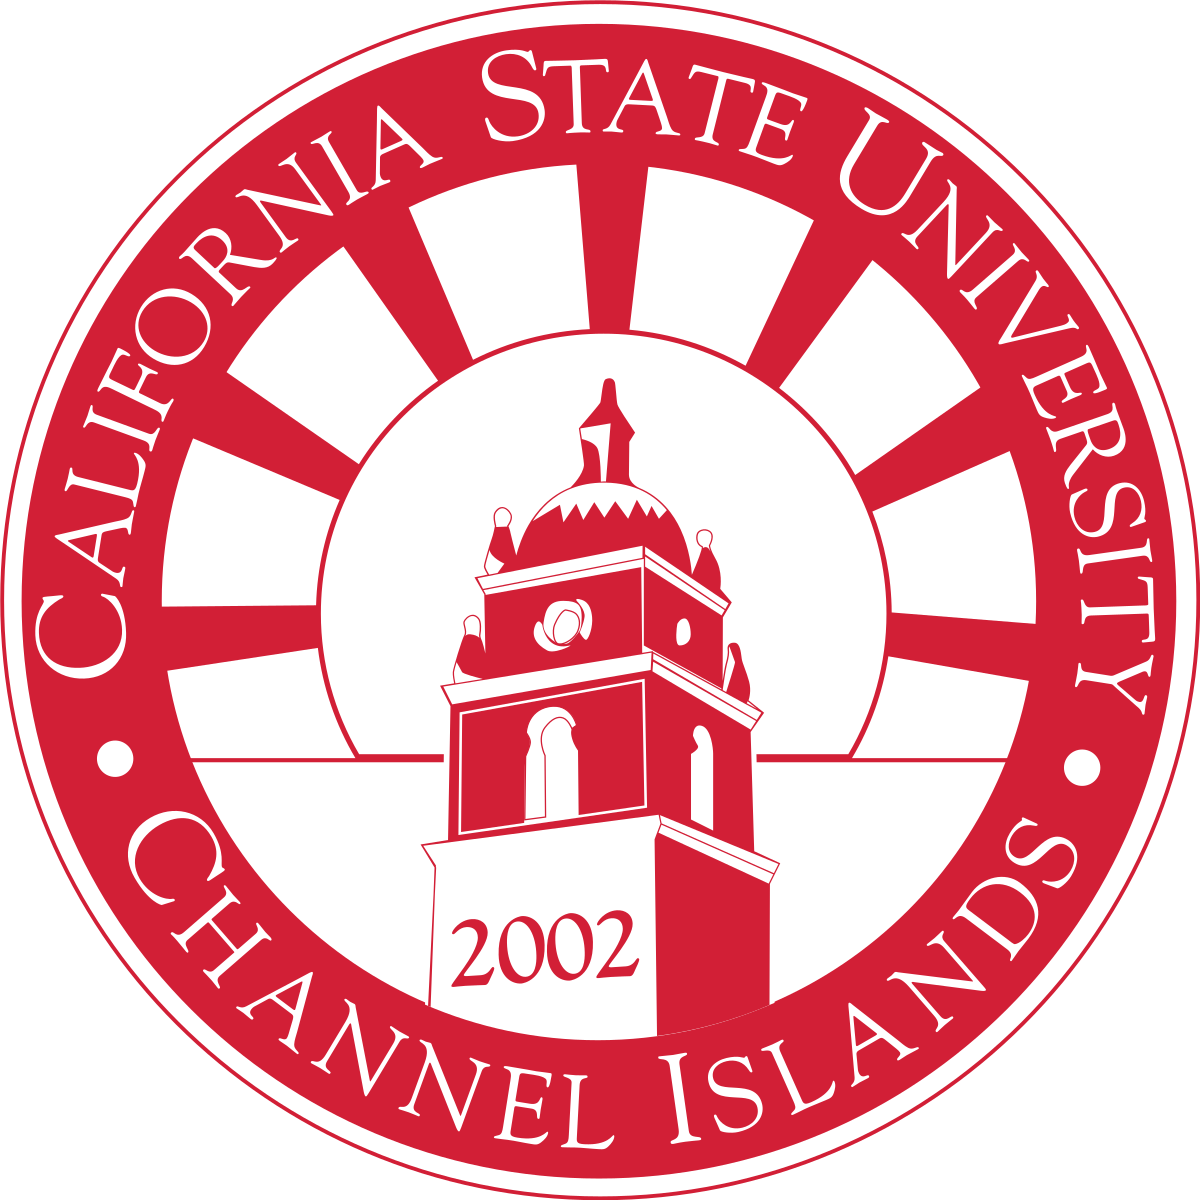 The seal of CSU Channel Islands